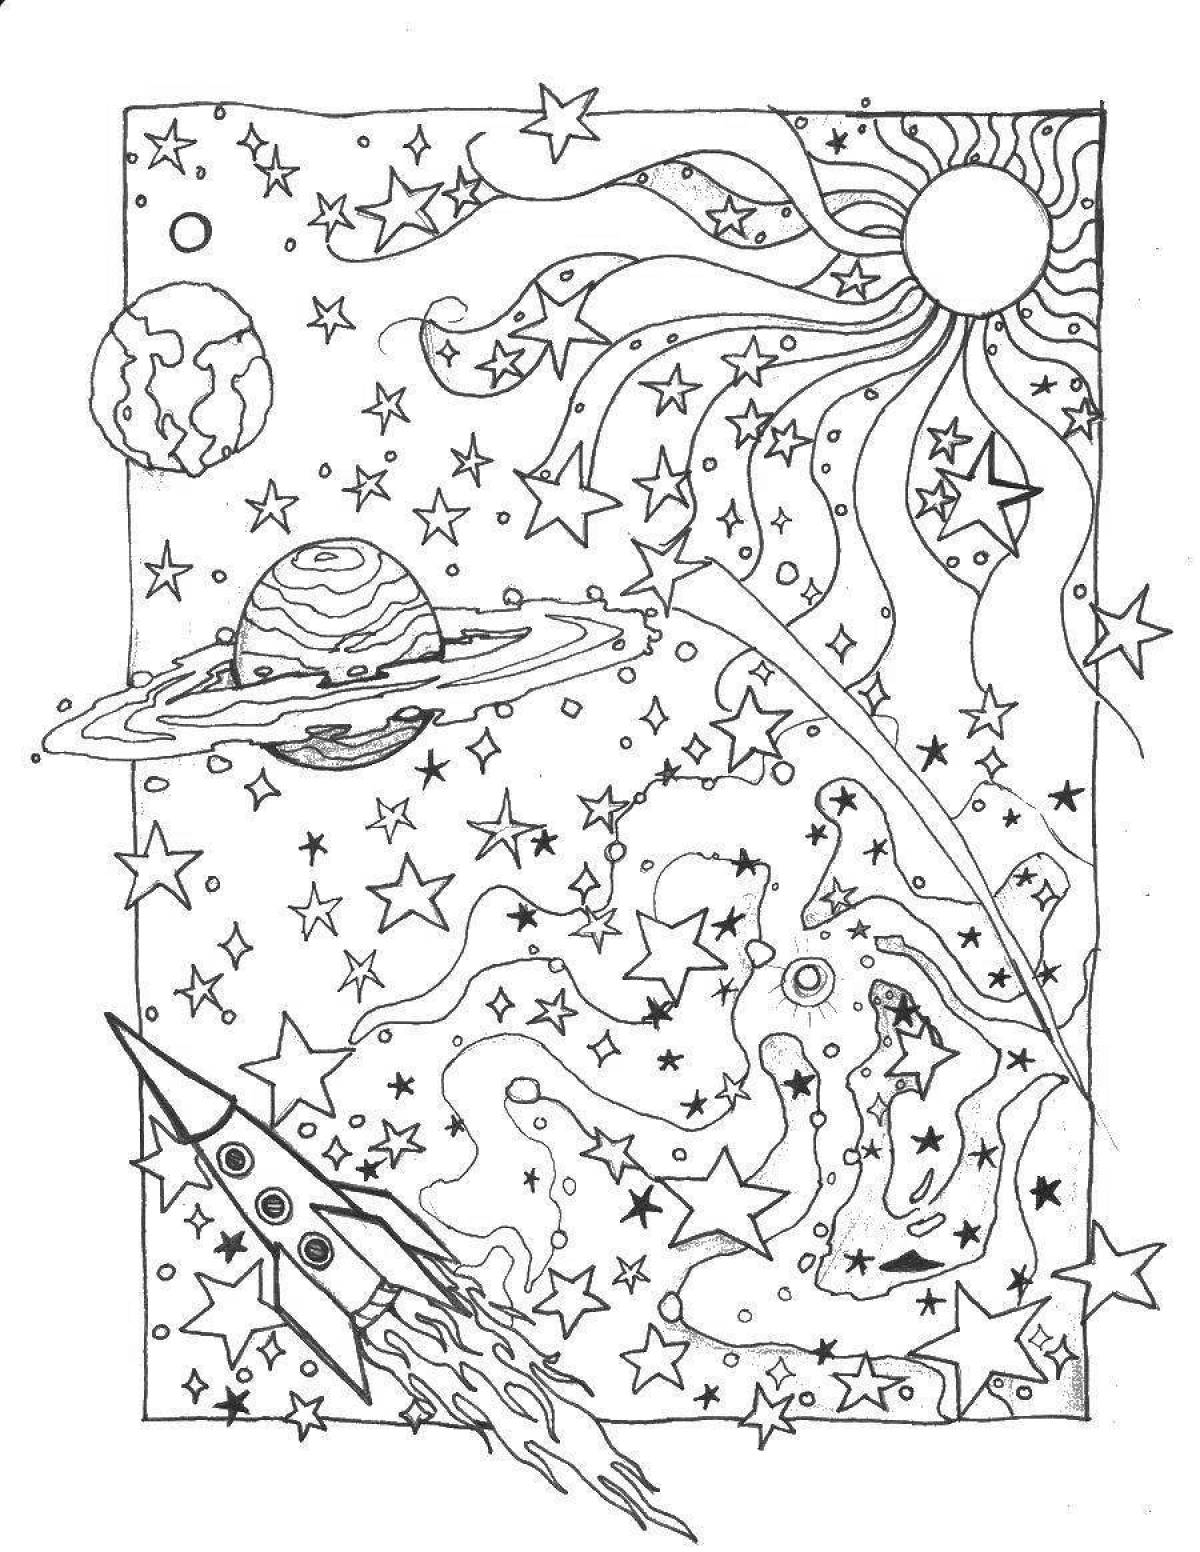 Brilliantly shaded universe coloring page